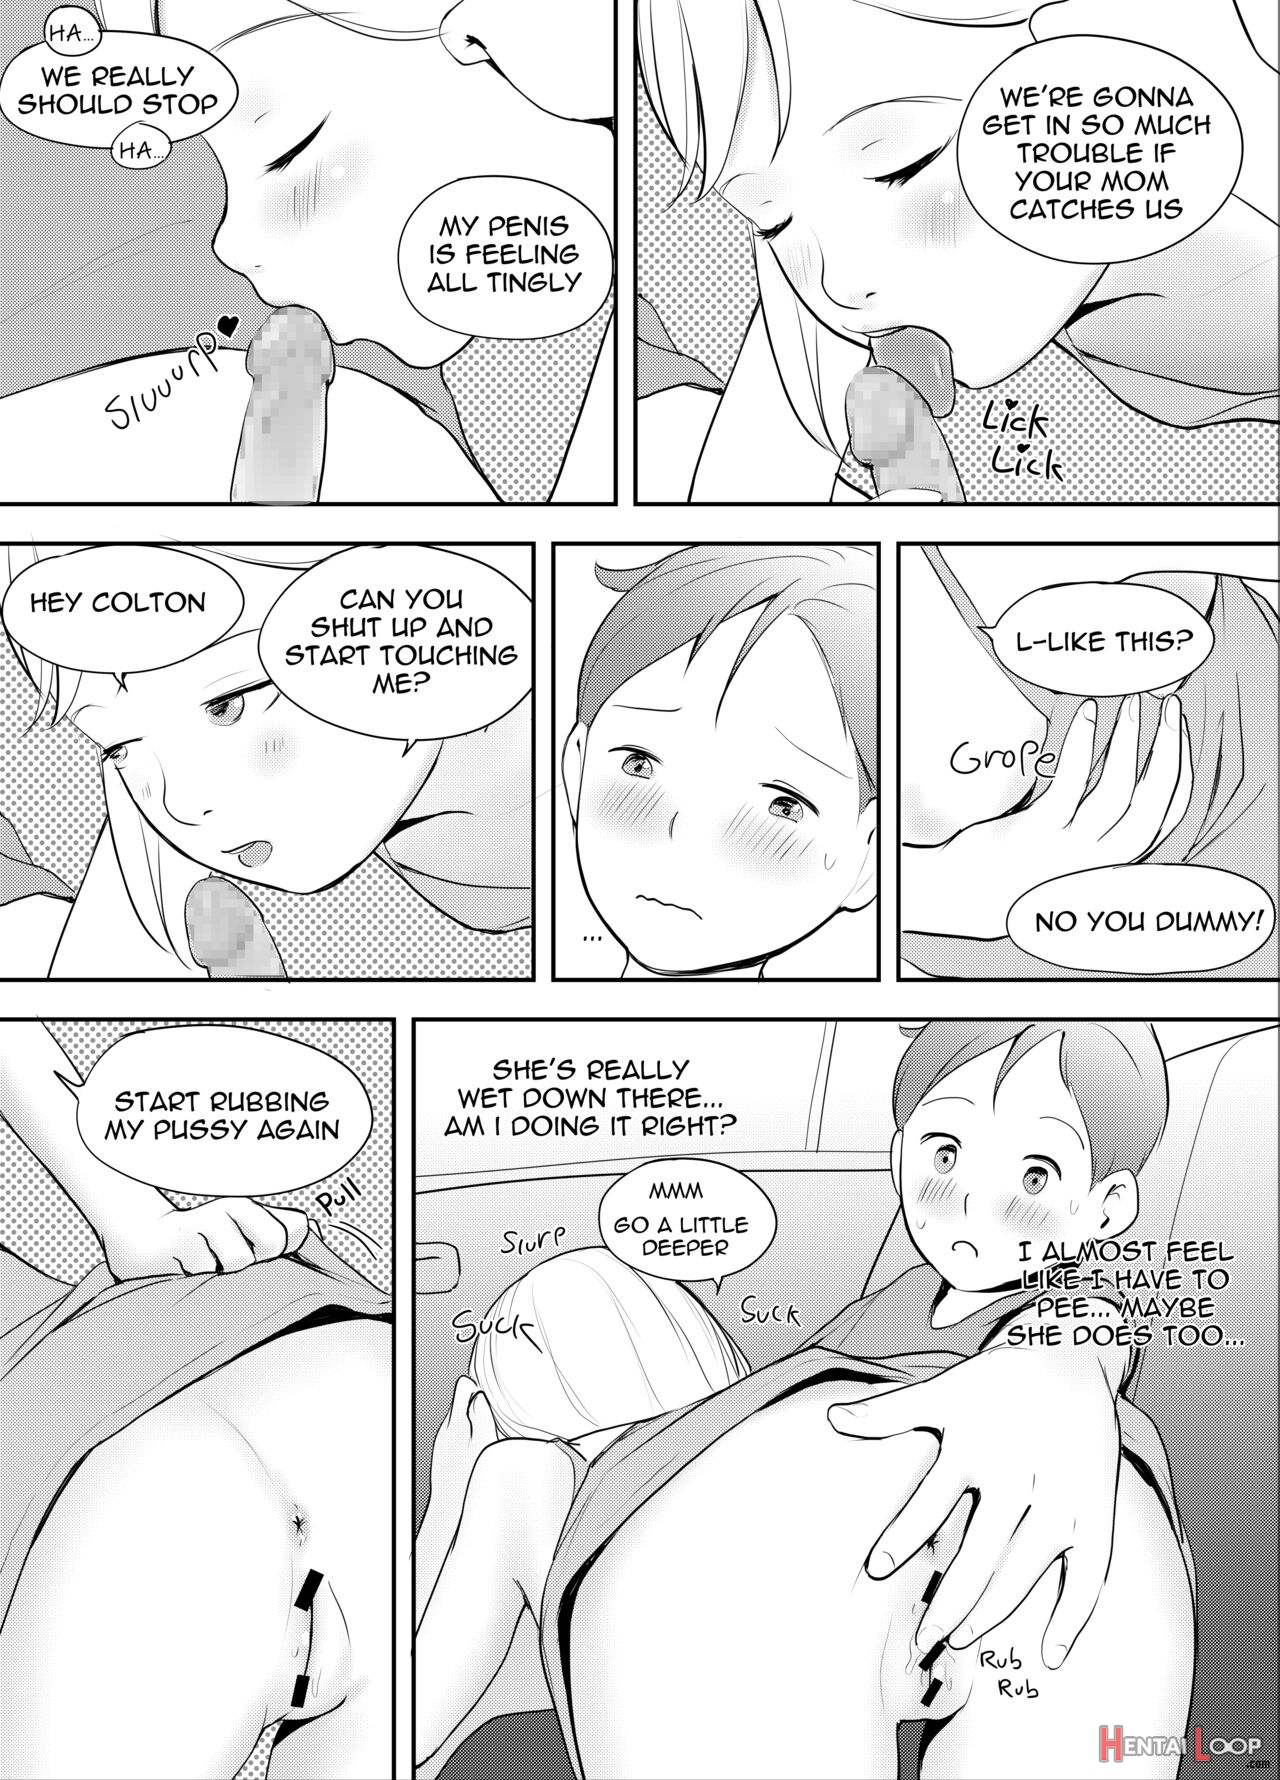 Passing The Time page 10